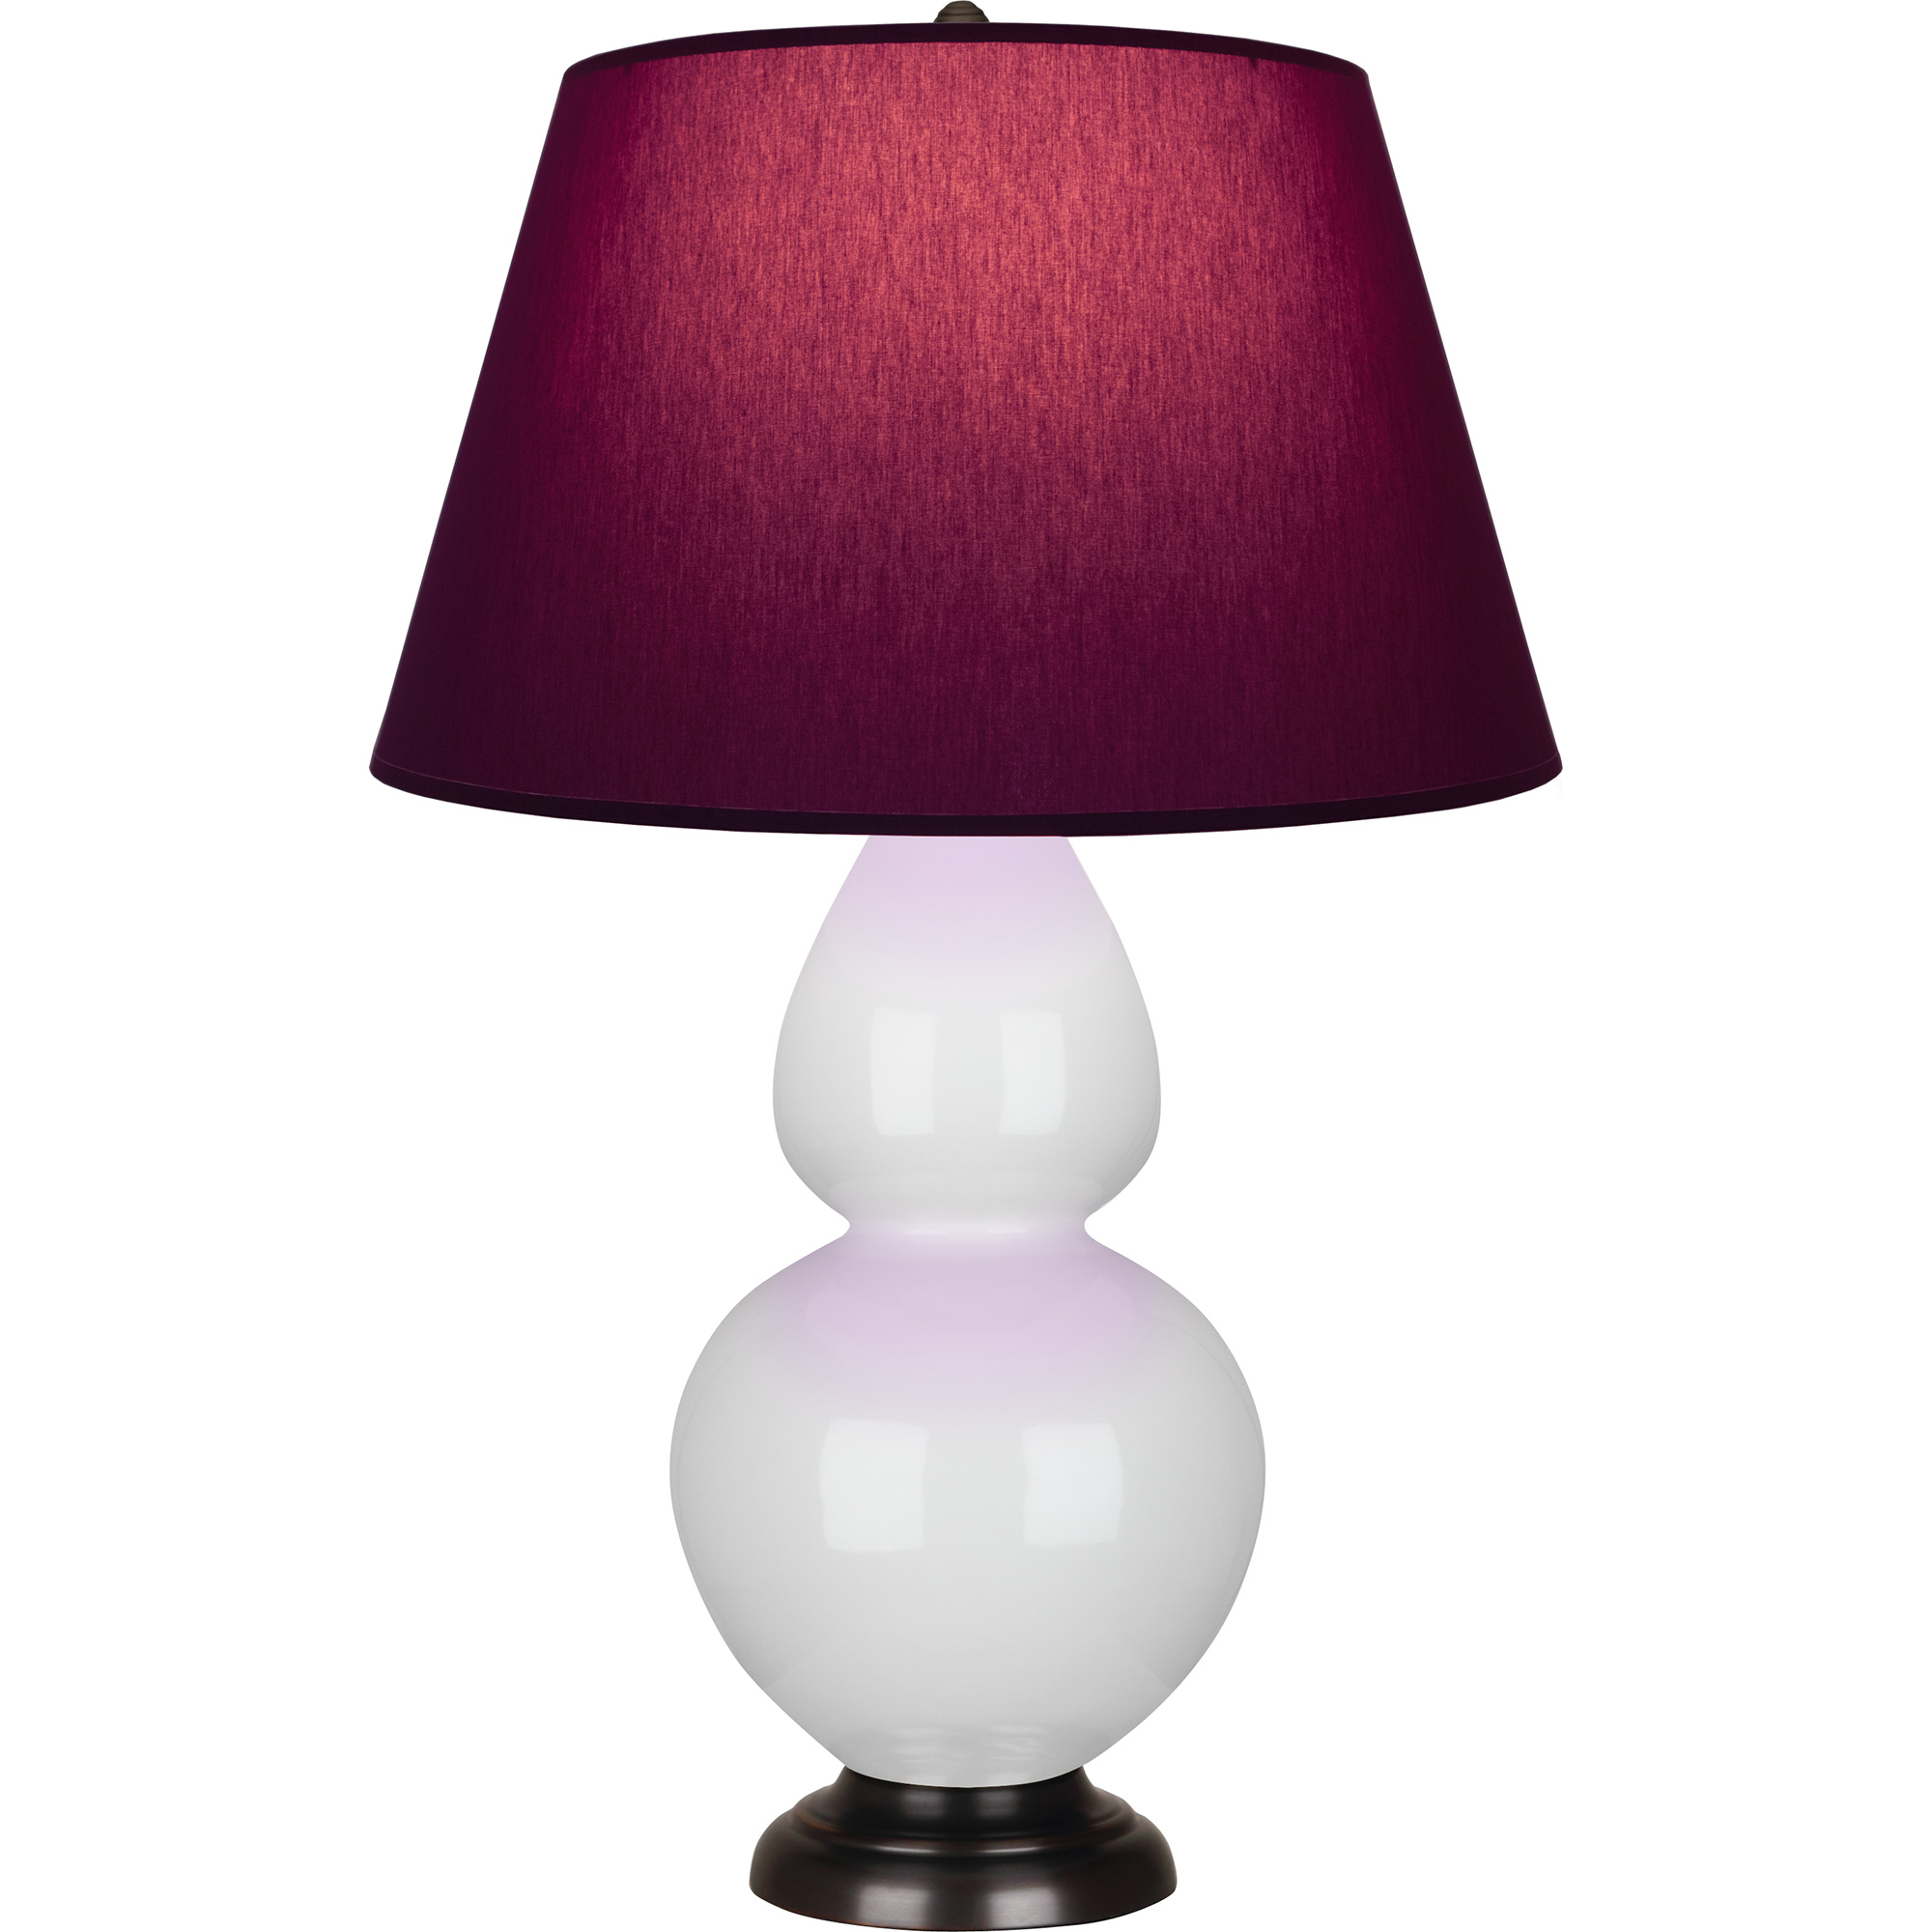 Double Gourd Table Lamp Style #1640P